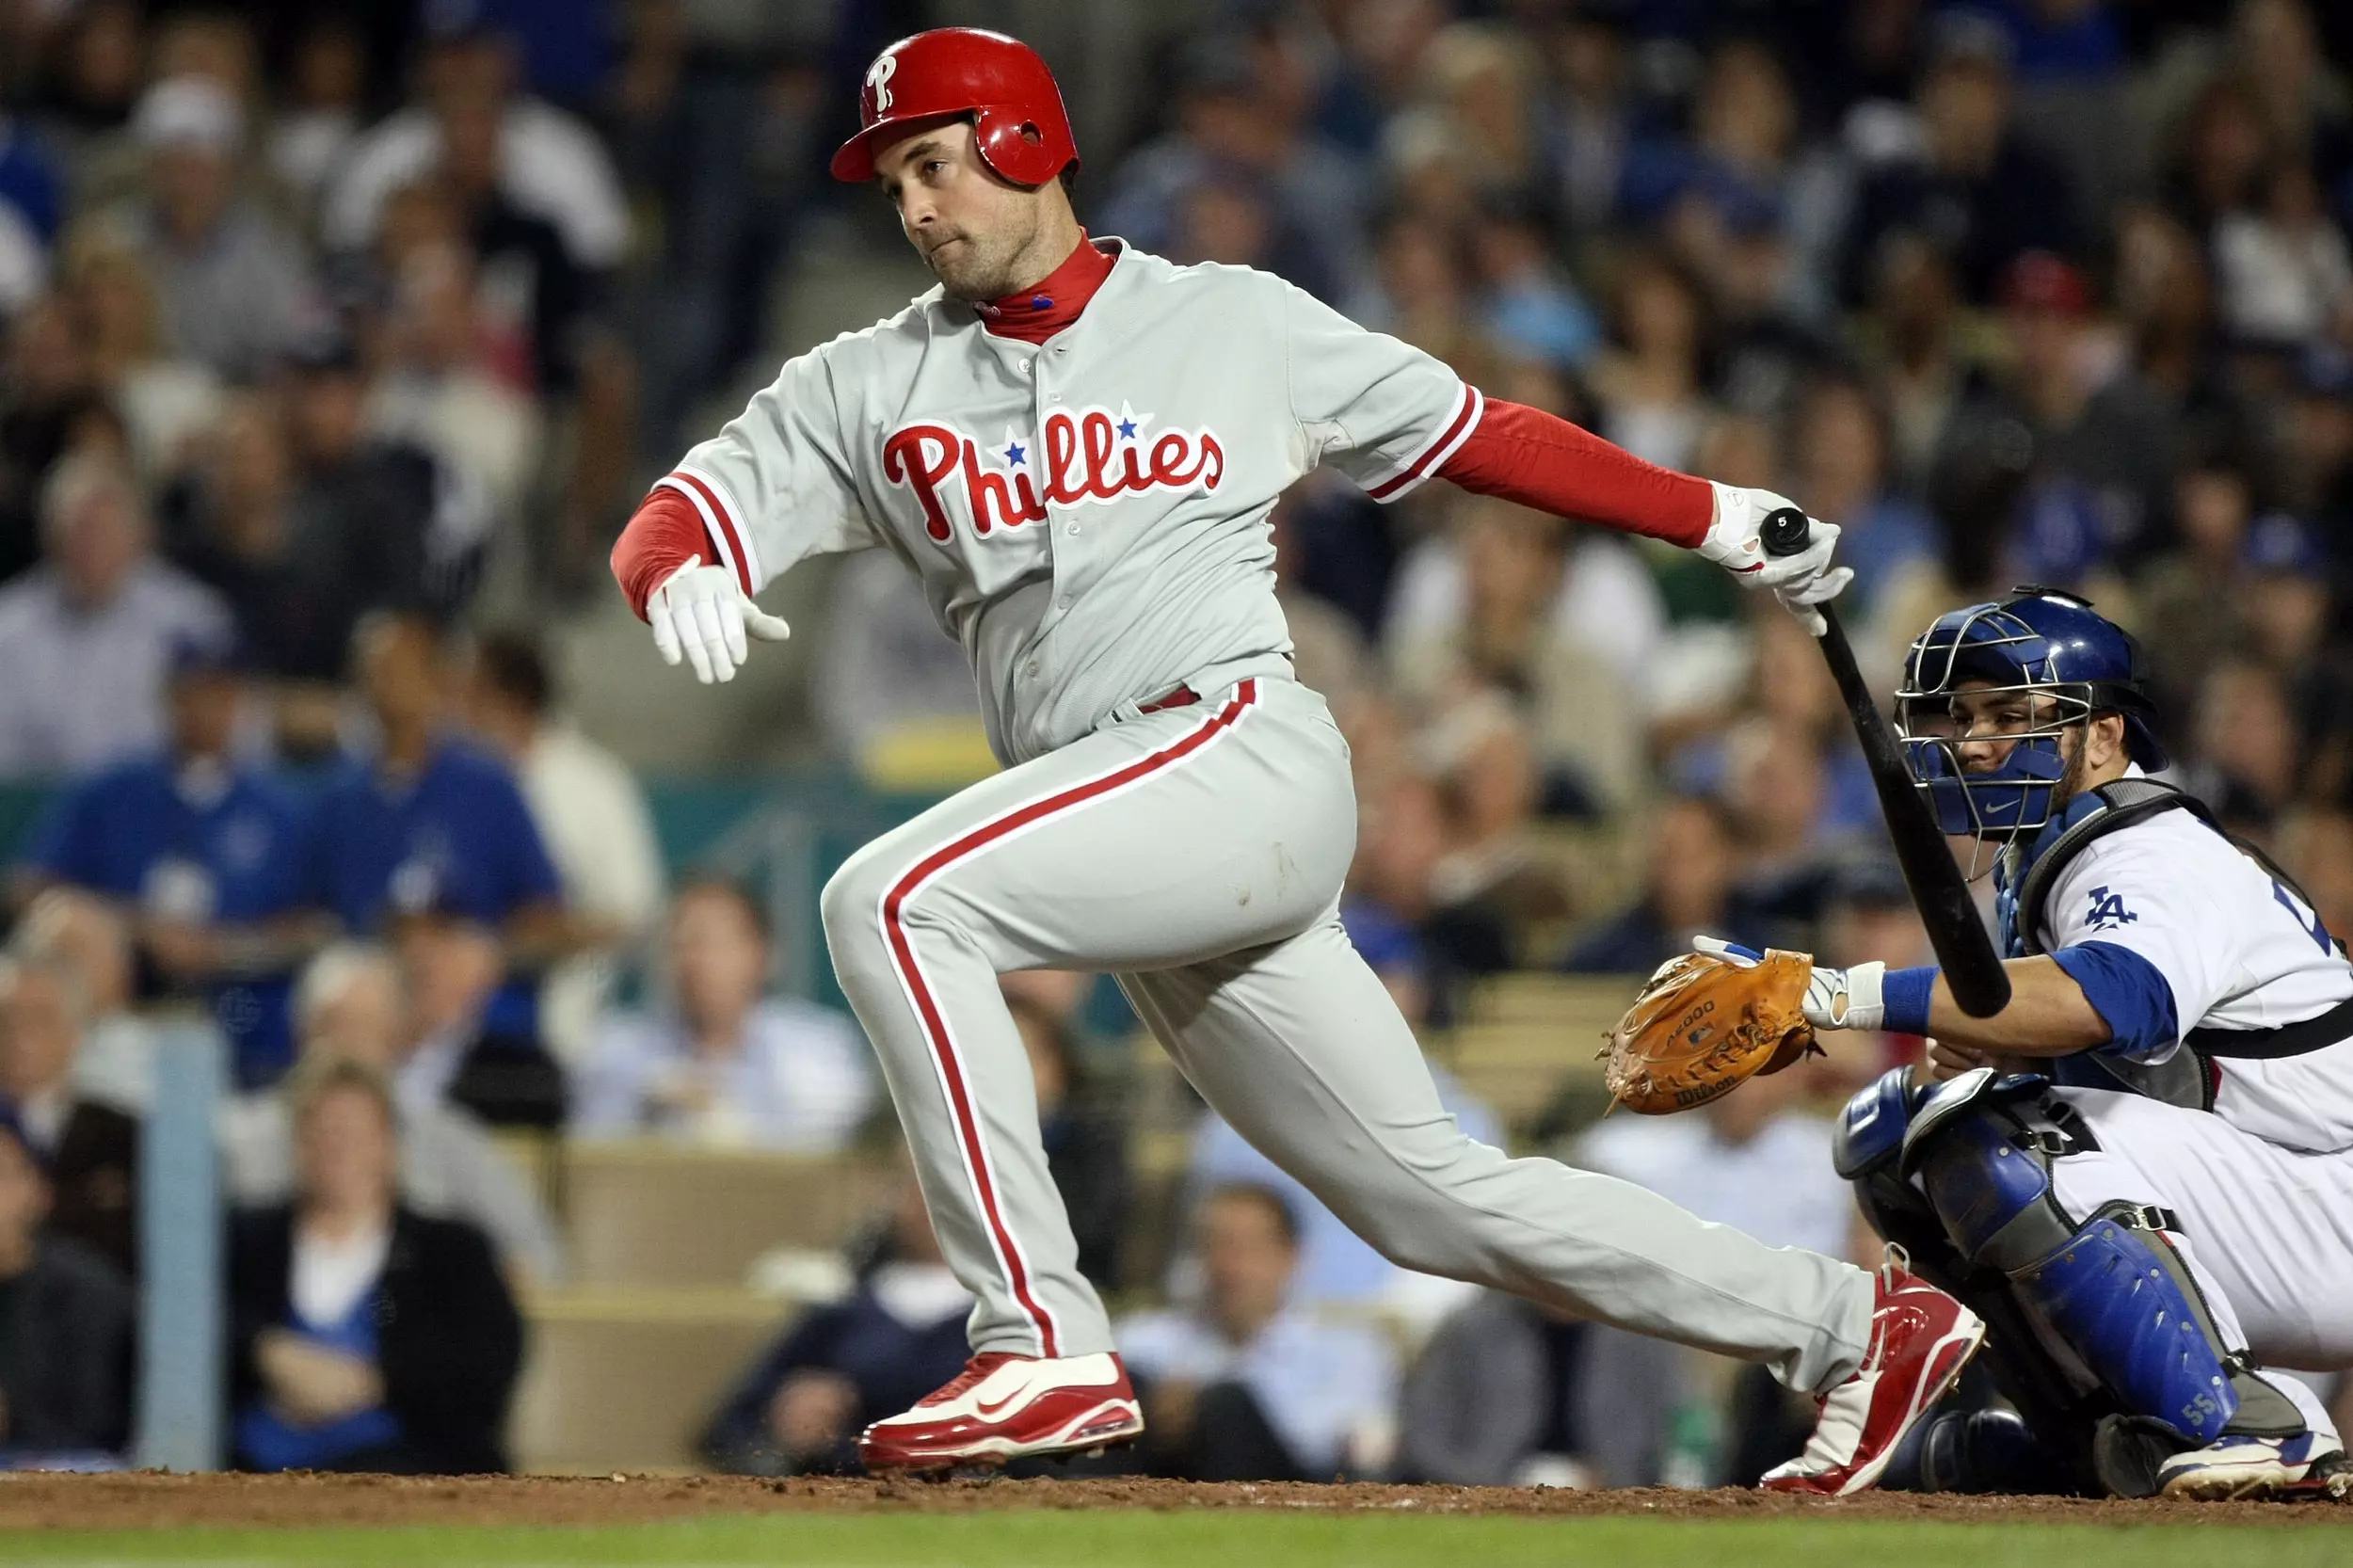 NLDS: Pat Burrell to Throw Out First Pitch at Phillies Game 4